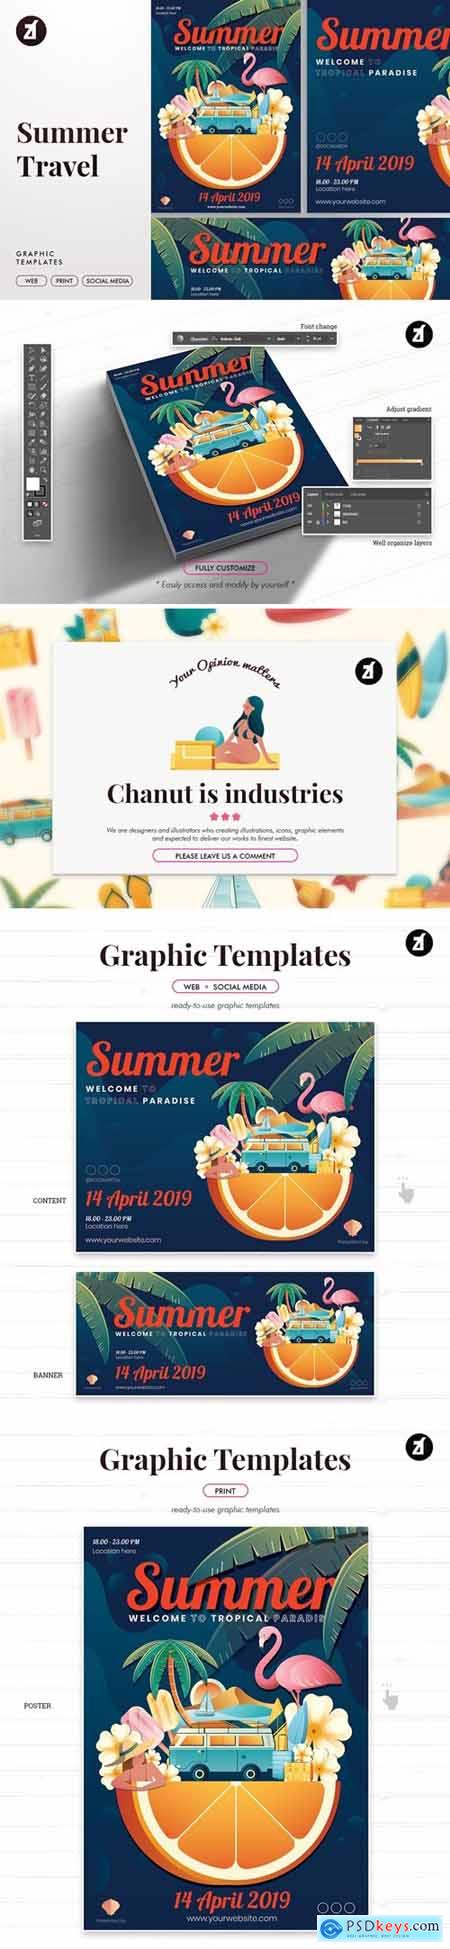 Summer graphic templates